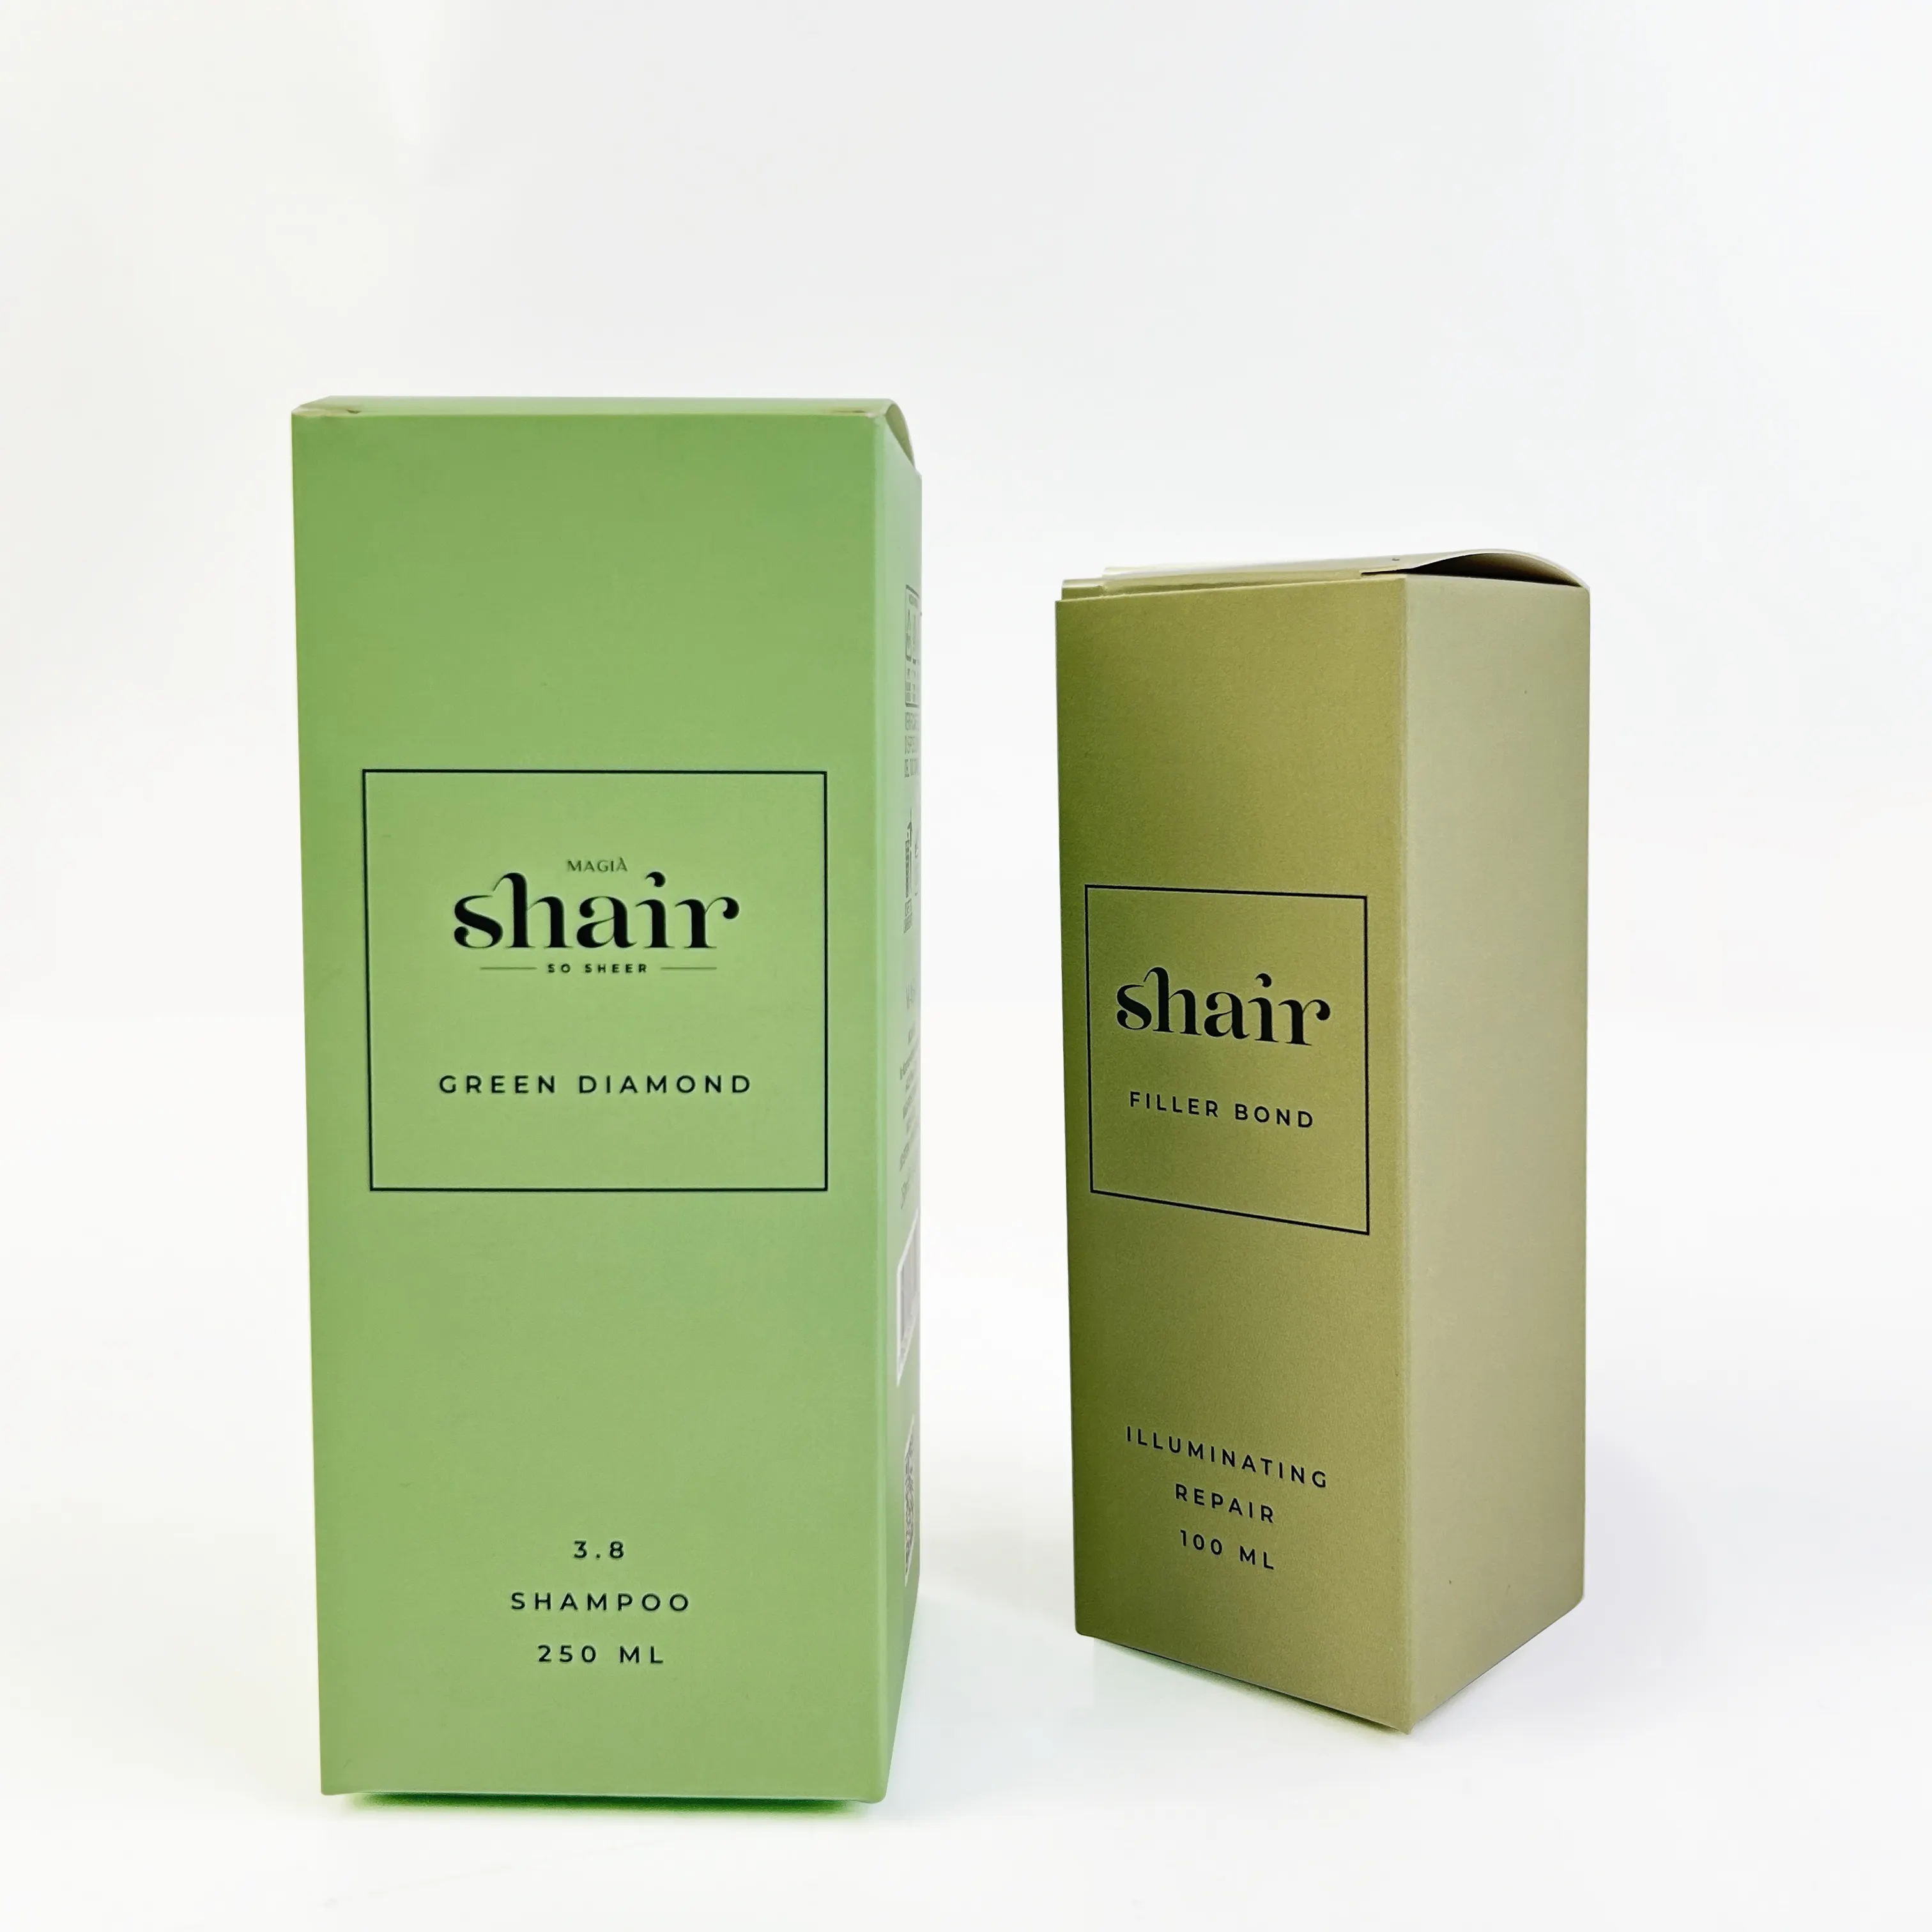 Custom Cosmetic Perfume Box Cardboard Packaging Boxes for small business with your logo